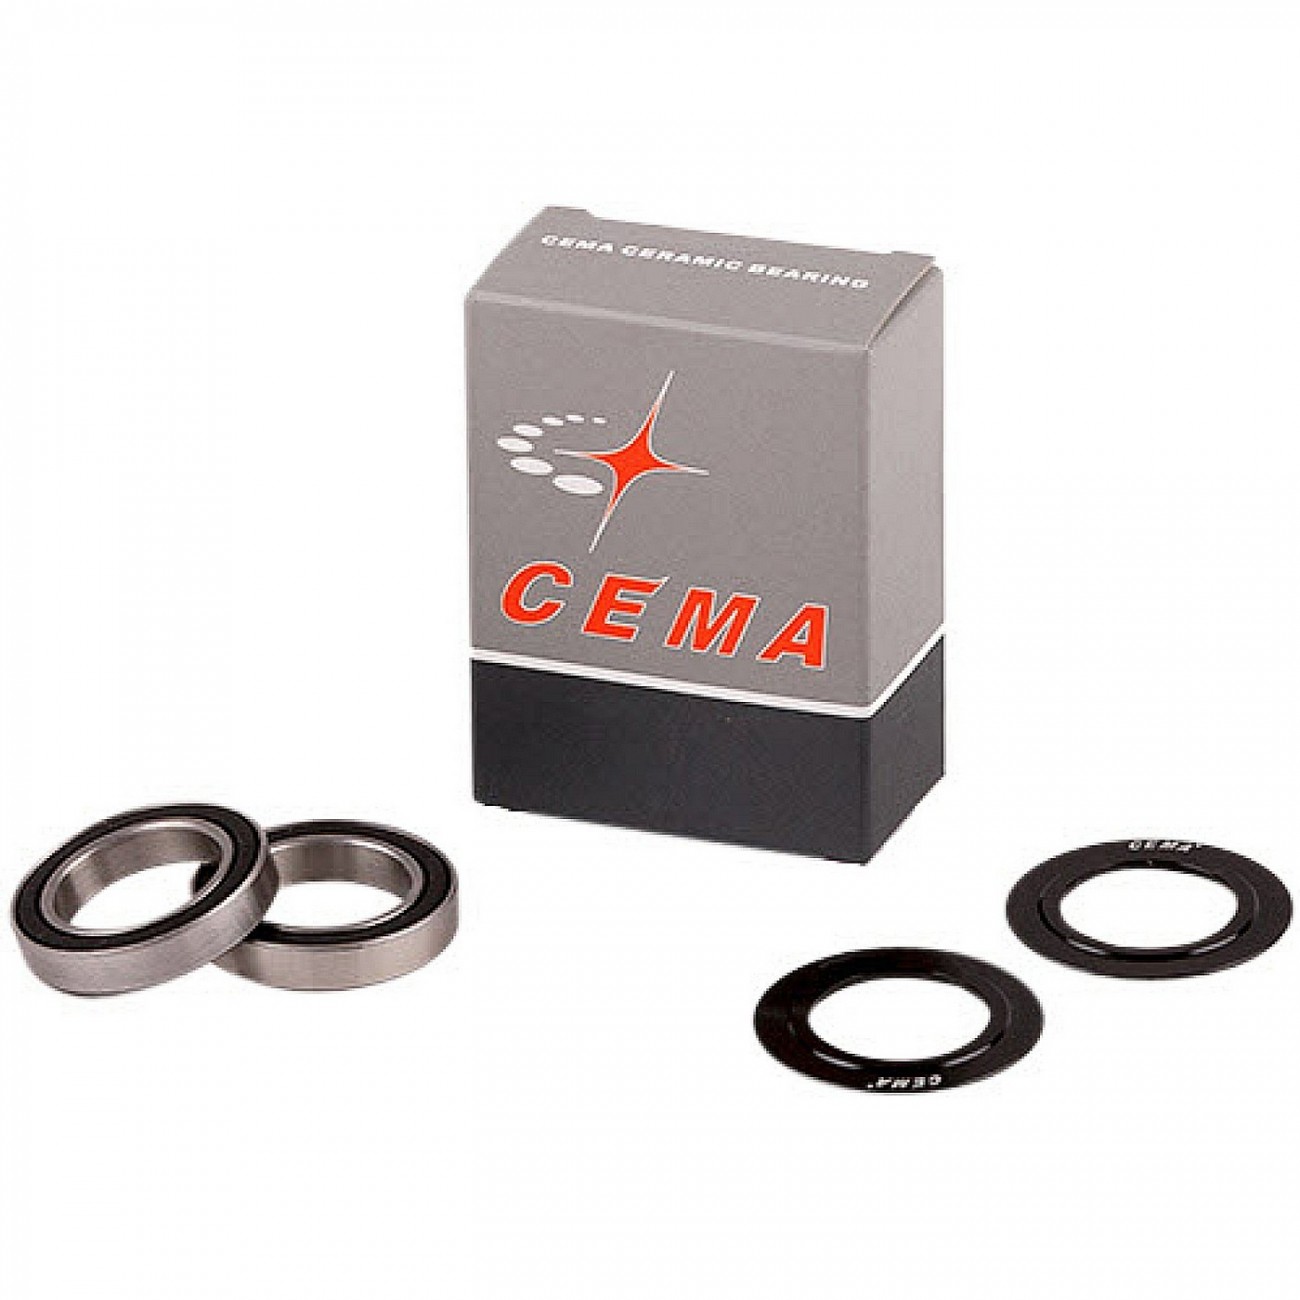 Sparepart bearing kit for cema bb includes 2 bearings and 2 covers cema 30 mm - stainless - black - 1